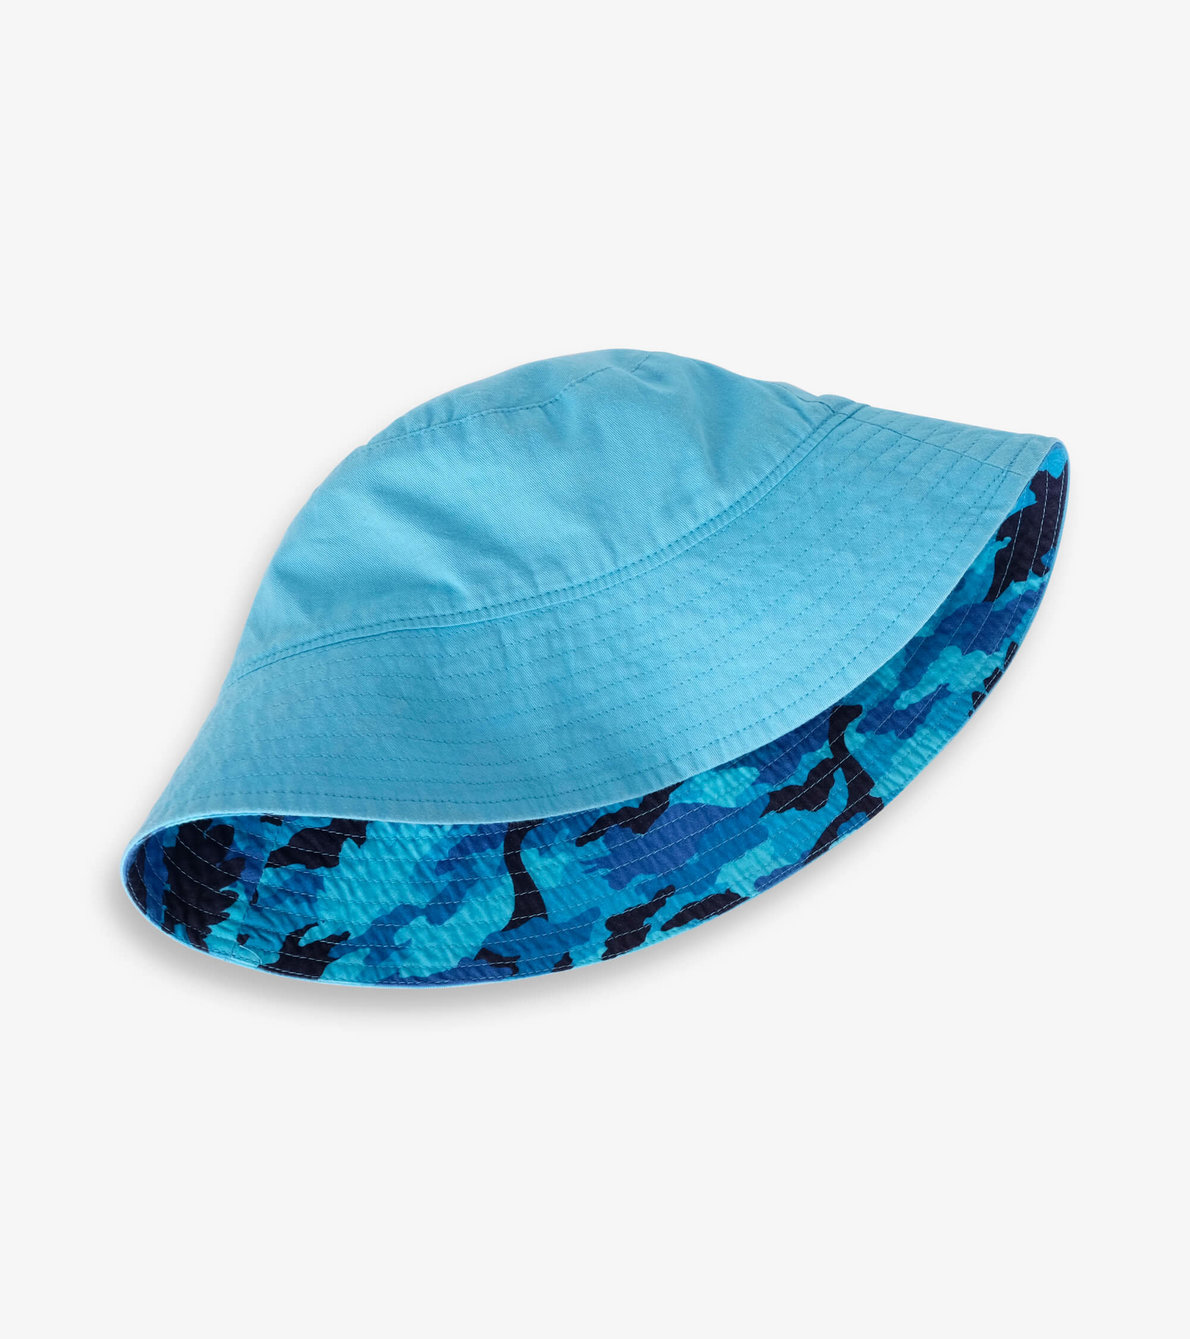 View larger image of Dino Camo Reversible Sun Hat